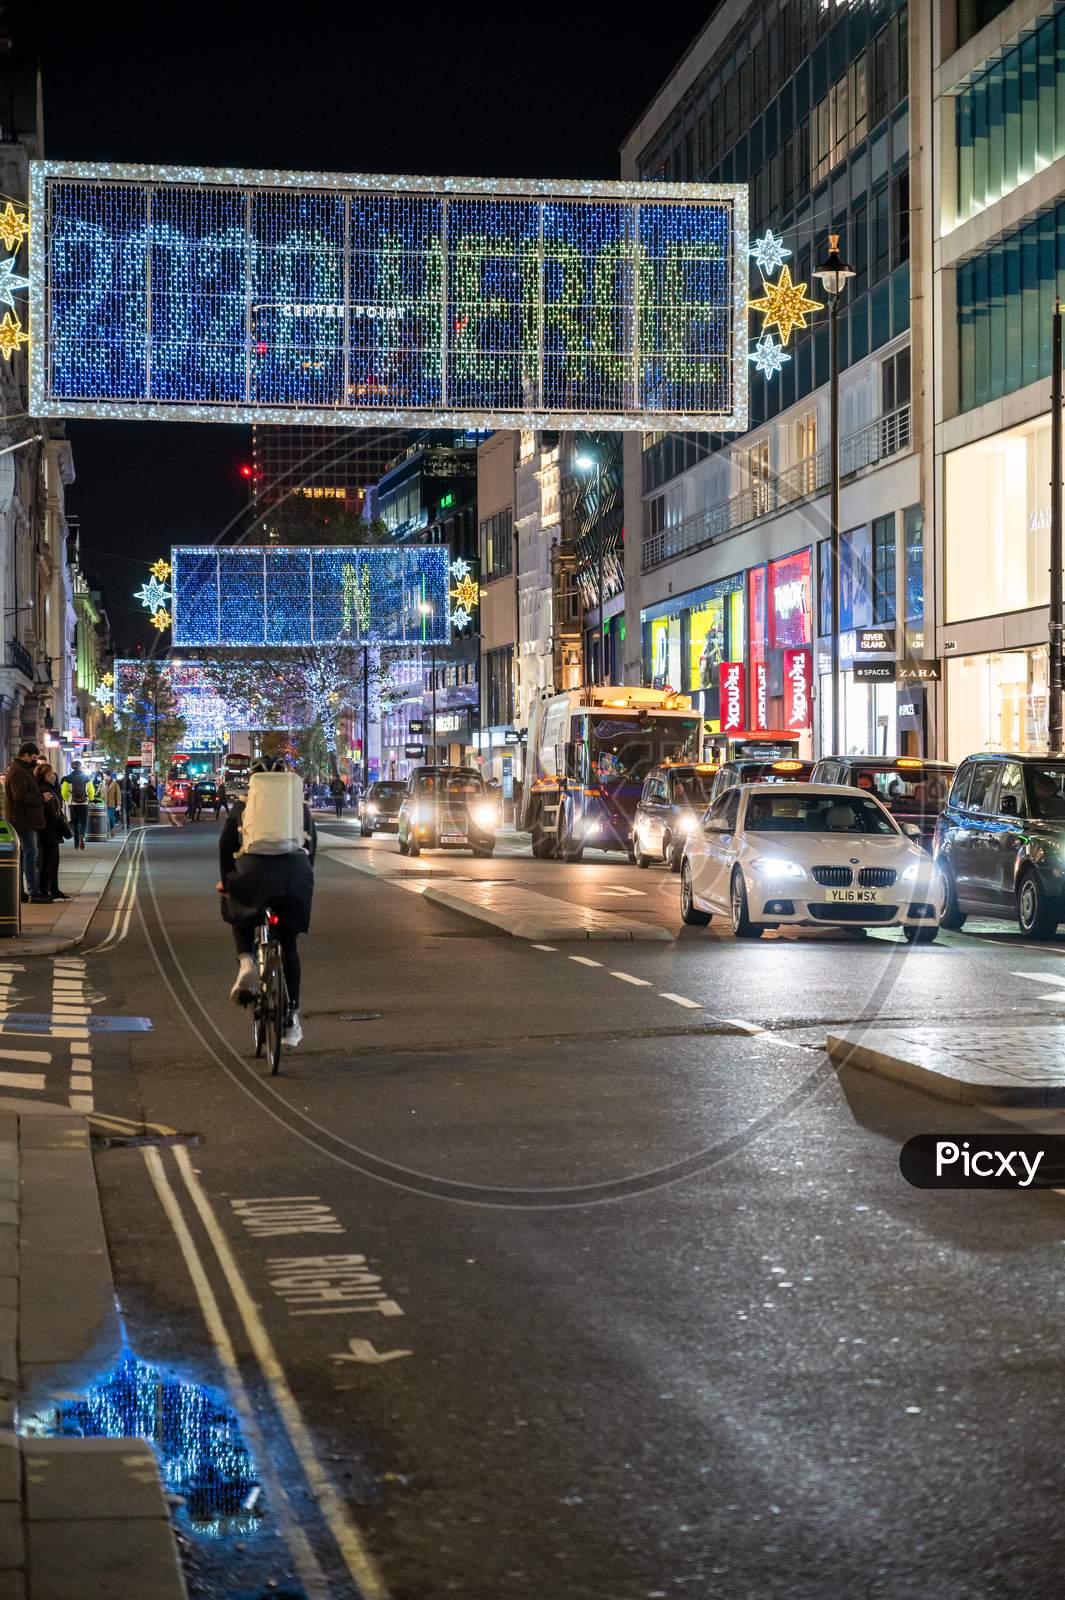 A Cyclist Rides Along Oxford Street Beneath The Christmas Decorations At Night